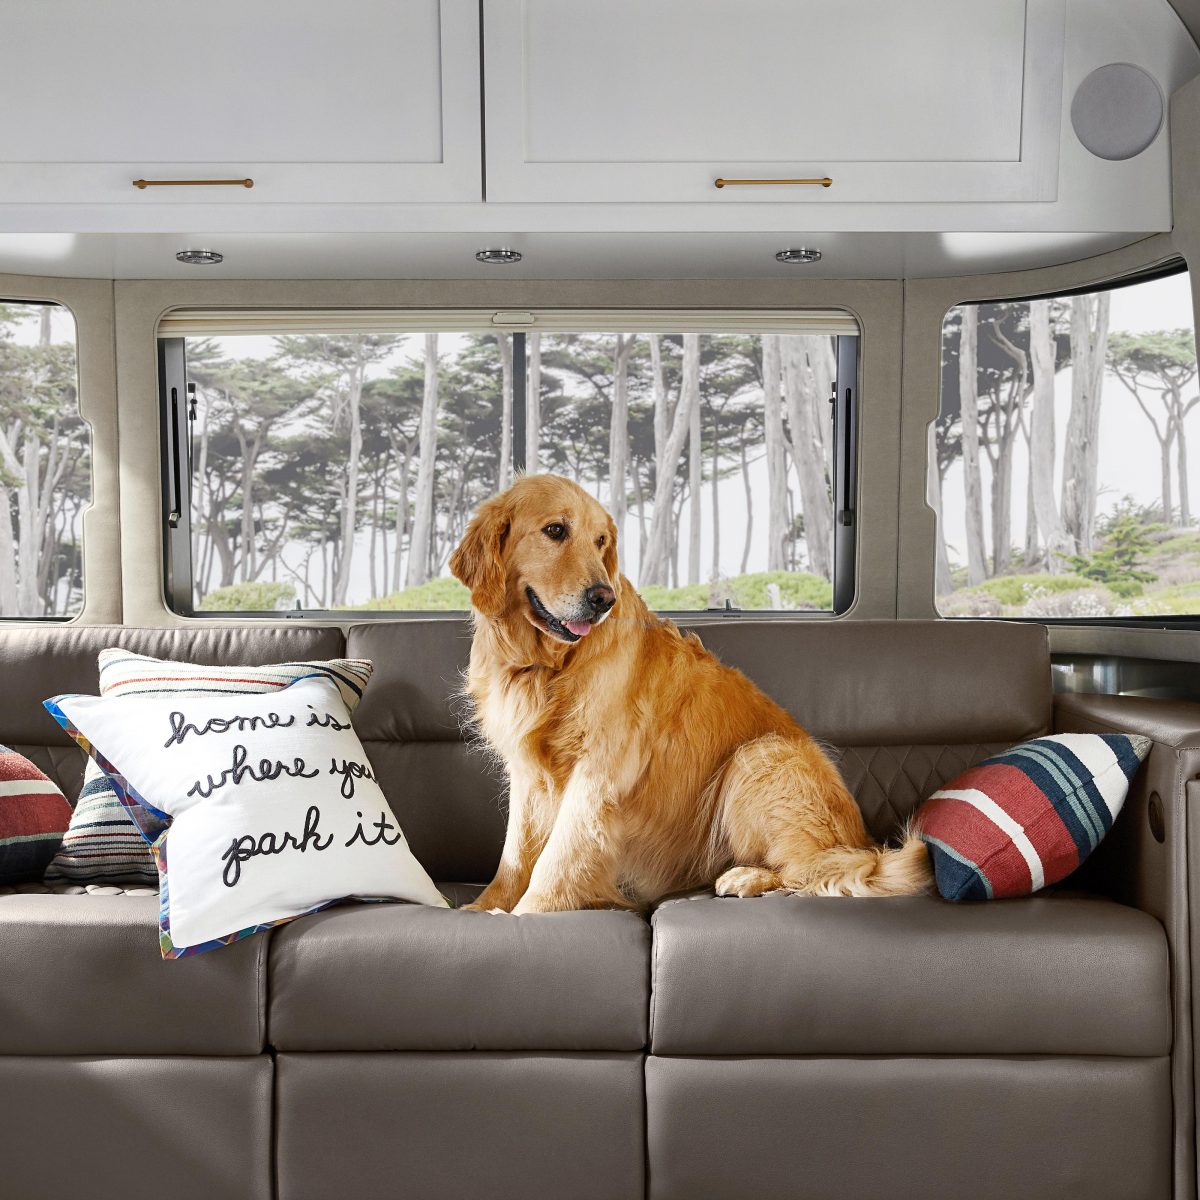 Pottery Barn Lumbar Dog Home is Where You Park It